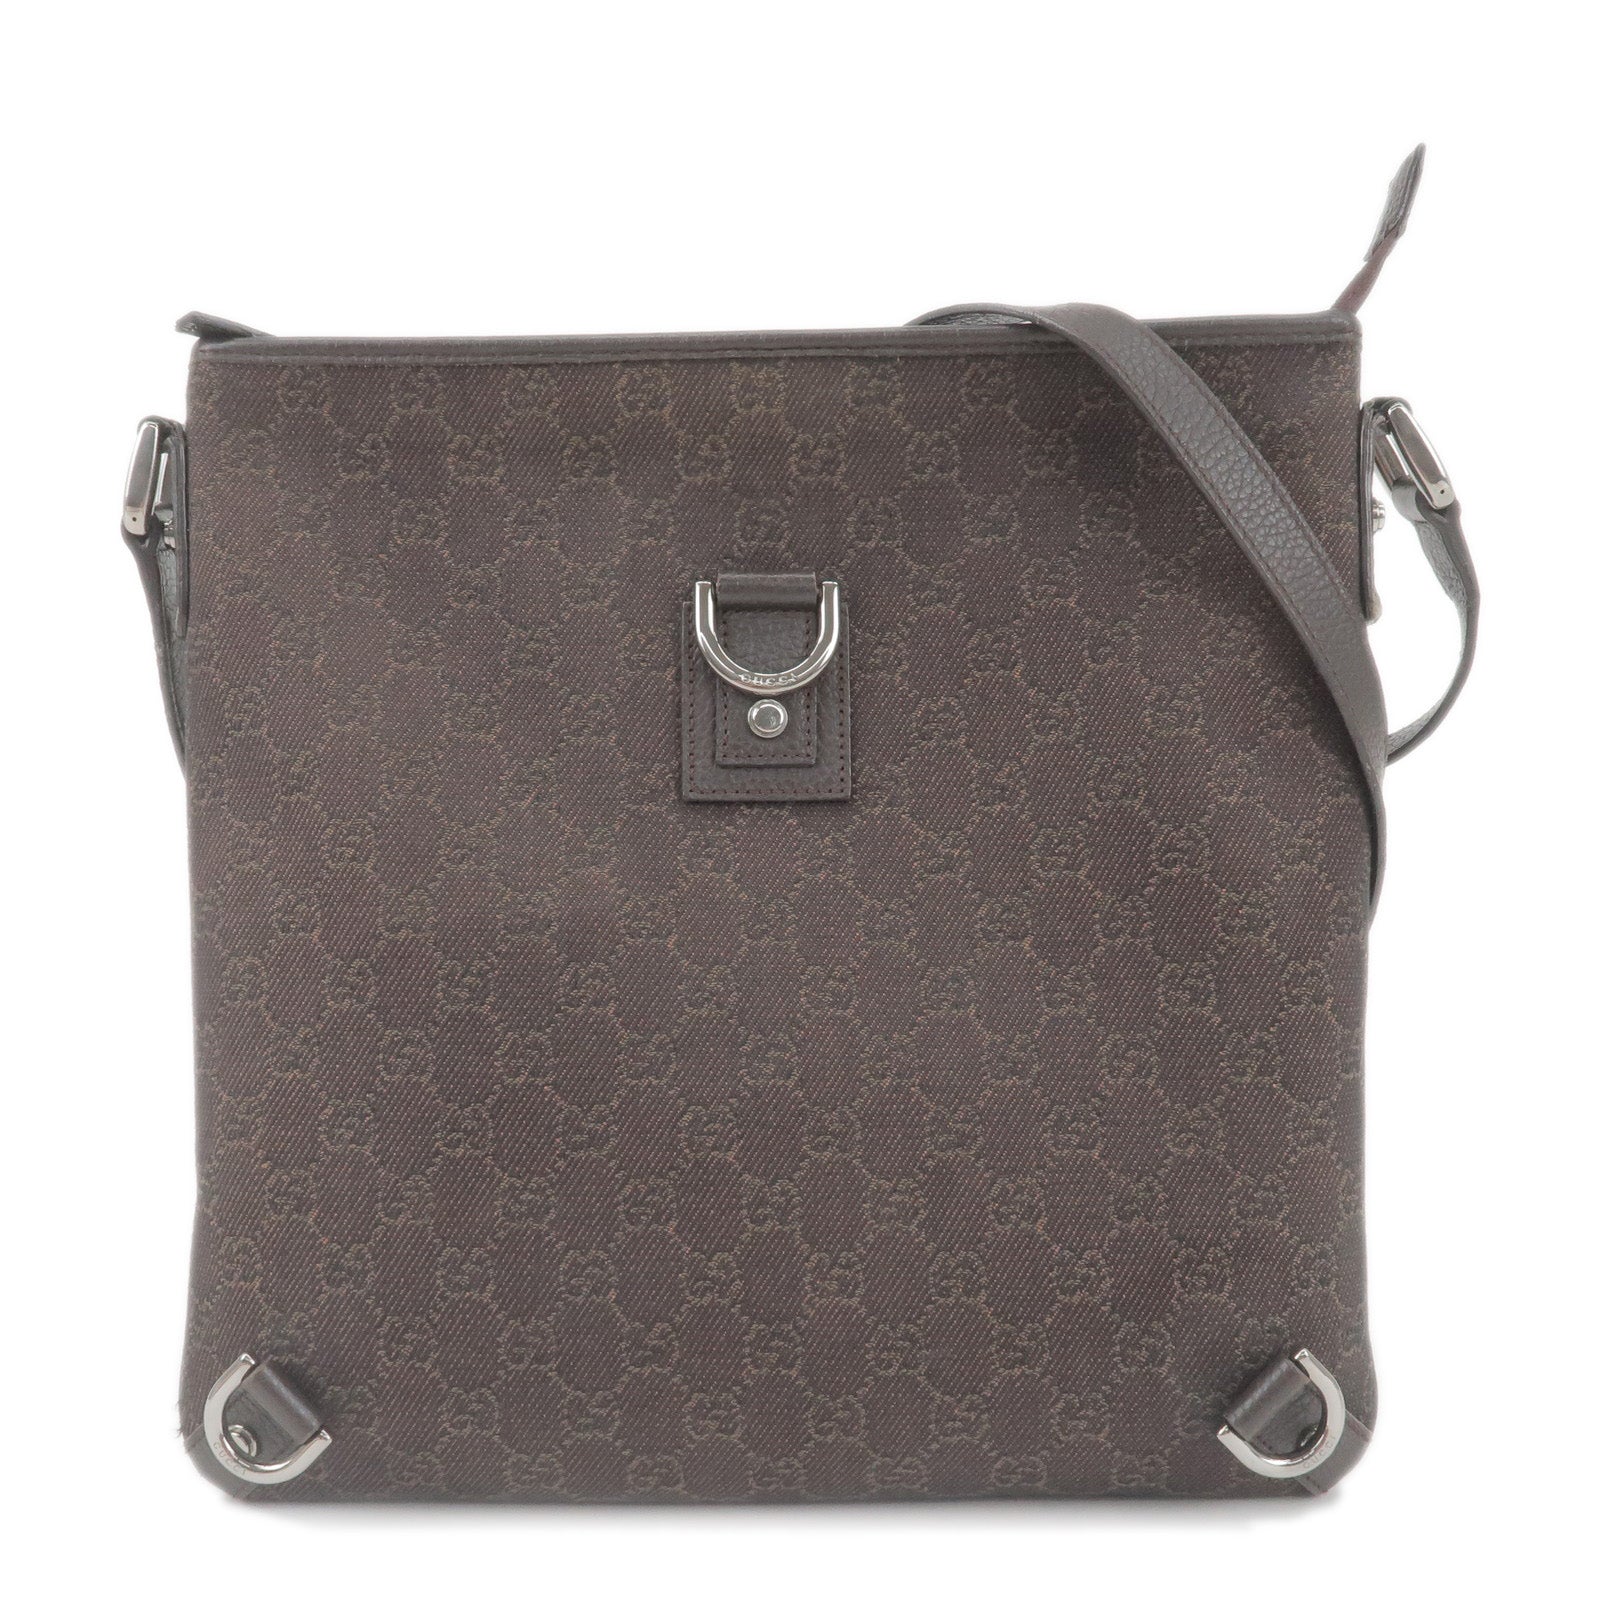 GUCCI-Abbey-GG-Canvas-Leather-Shoulder-Bag-Brown-268642